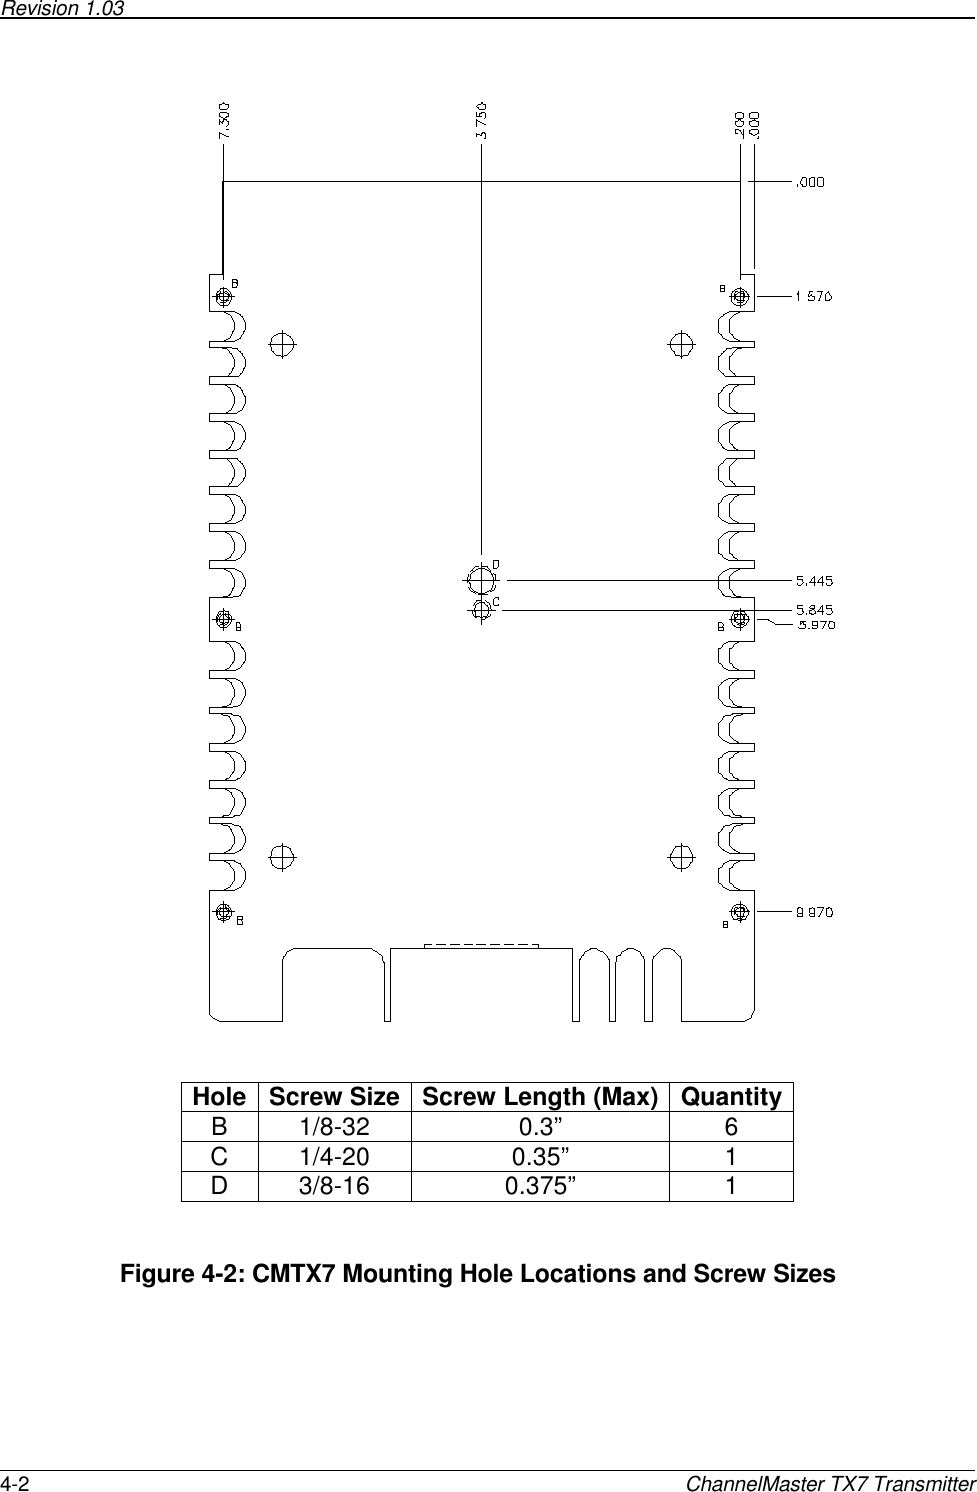 Revision 1.03       4-2  ChannelMaster TX7 Transmitter     Hole Screw Size Screw Length (Max) Quantity B  1/8-32  0.3”  6 C  1/4-20  0.35”  1 D  3/8-16  0.375”  1   Figure 4-2: CMTX7 Mounting Hole Locations and Screw Sizes 